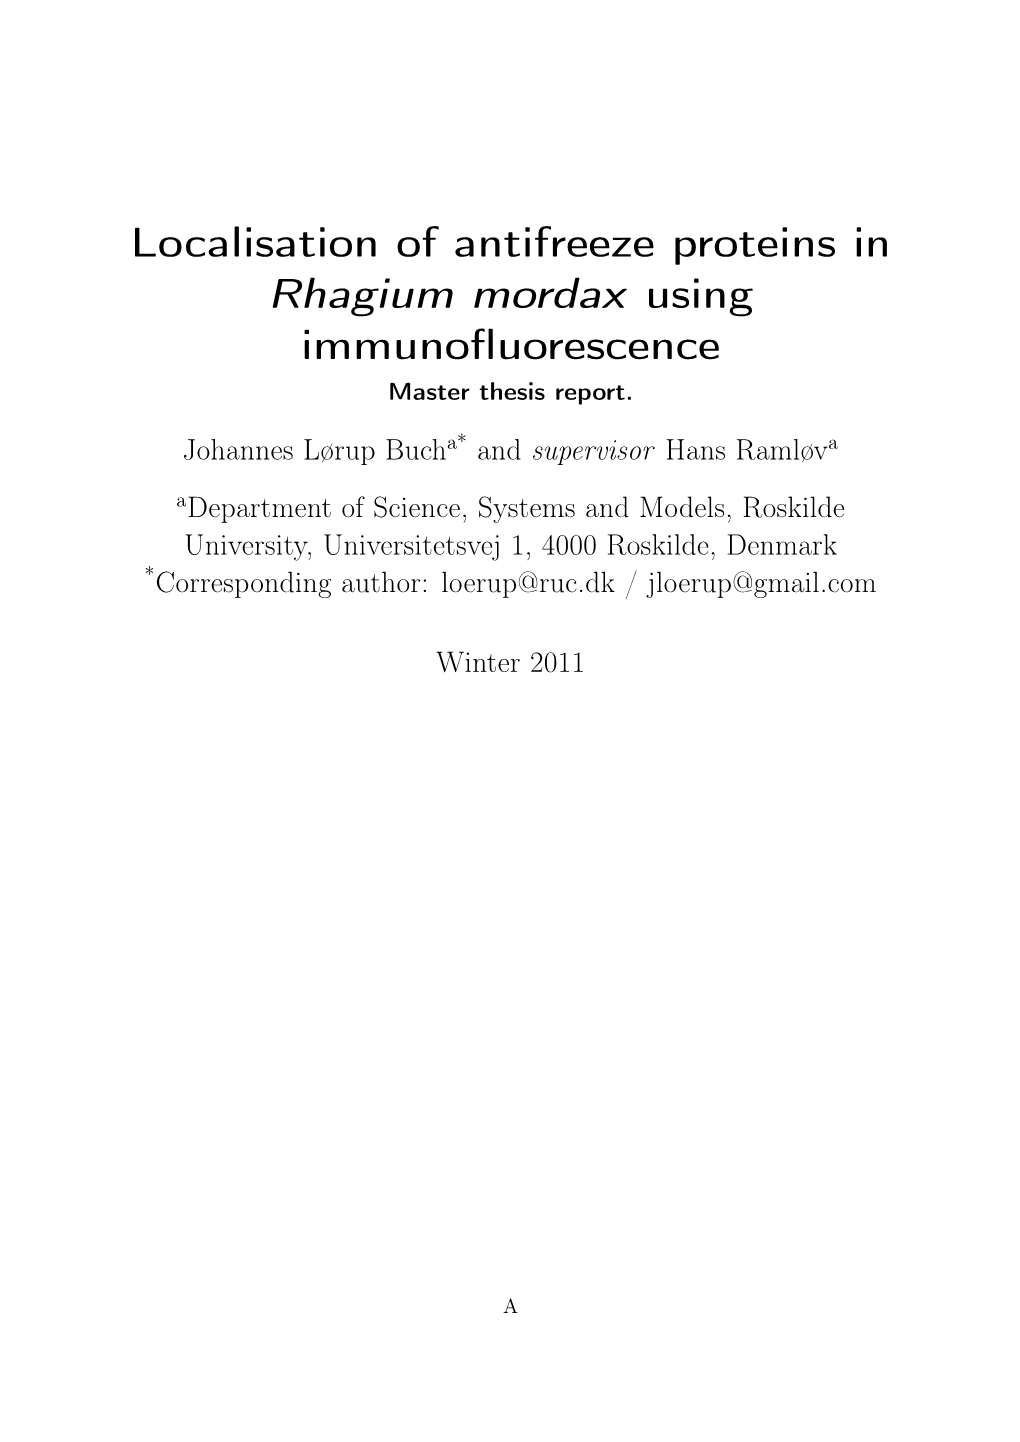 Localisation of Antifreeze Proteins in Rhagium Mordax Using Immunoﬂuorescence Master Thesis Report